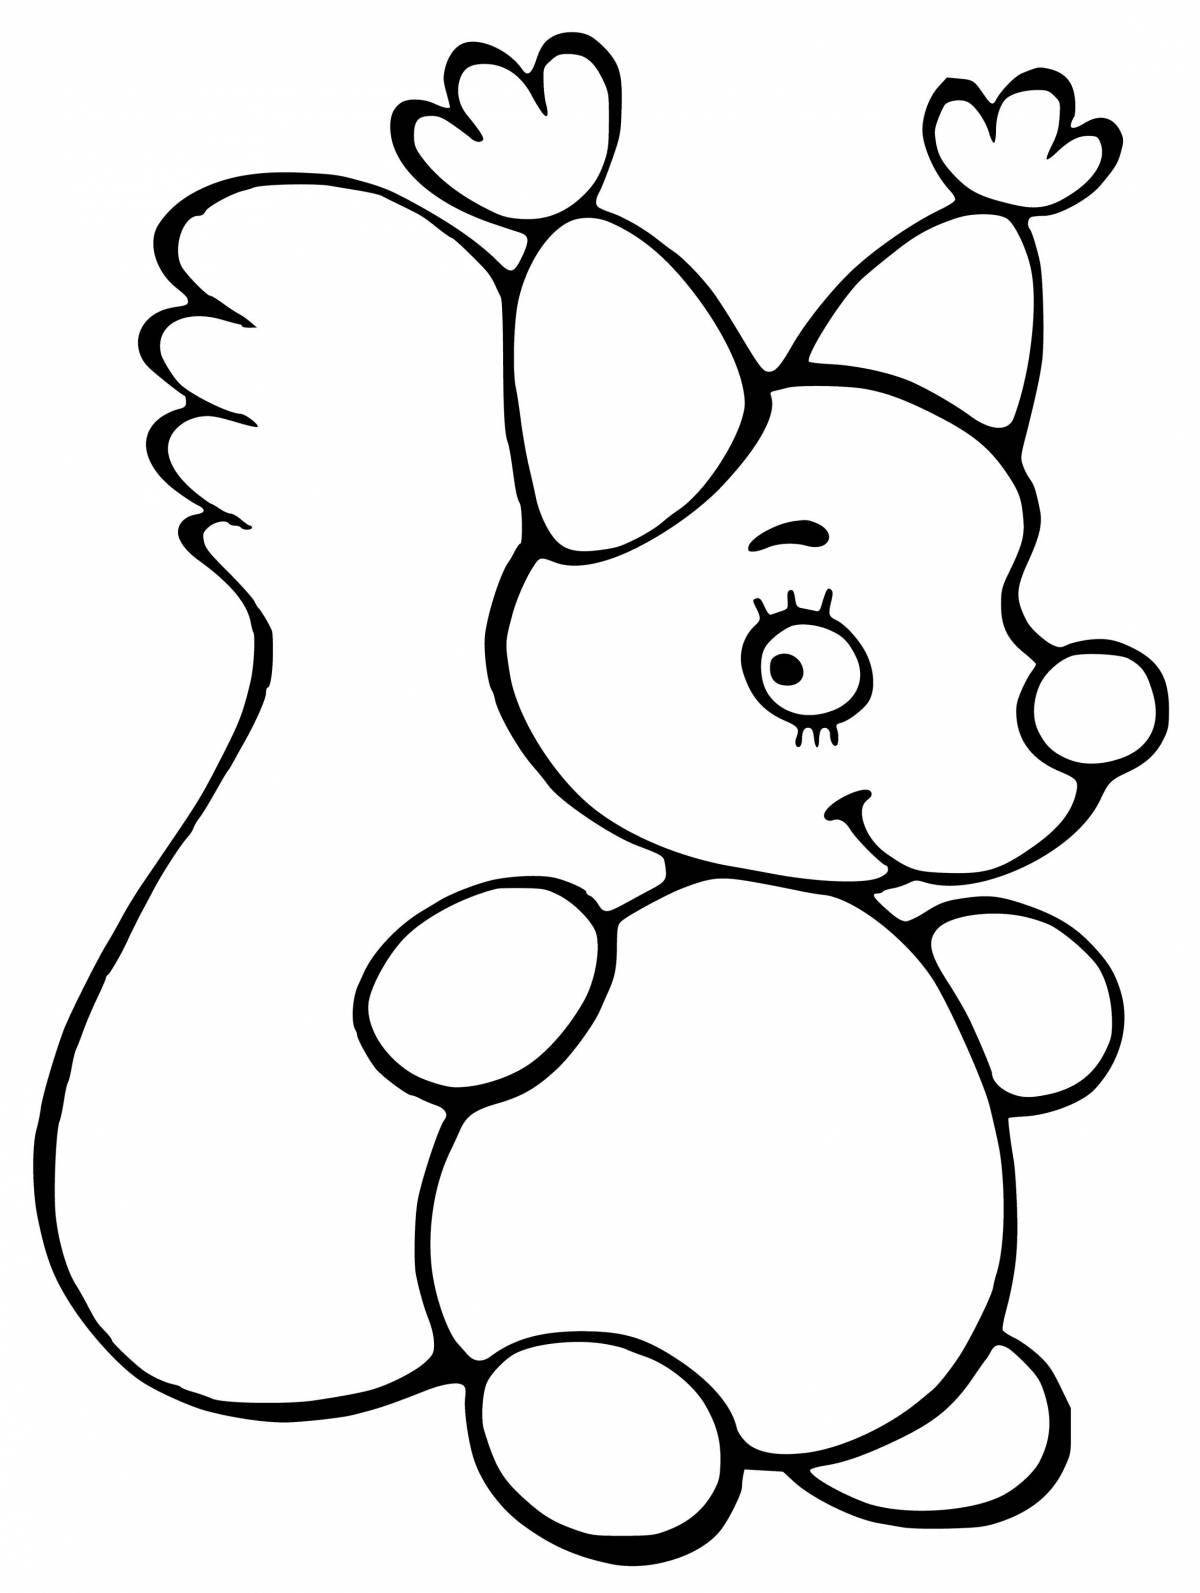 Color-frenzy contour coloring page for children 3-4 years old